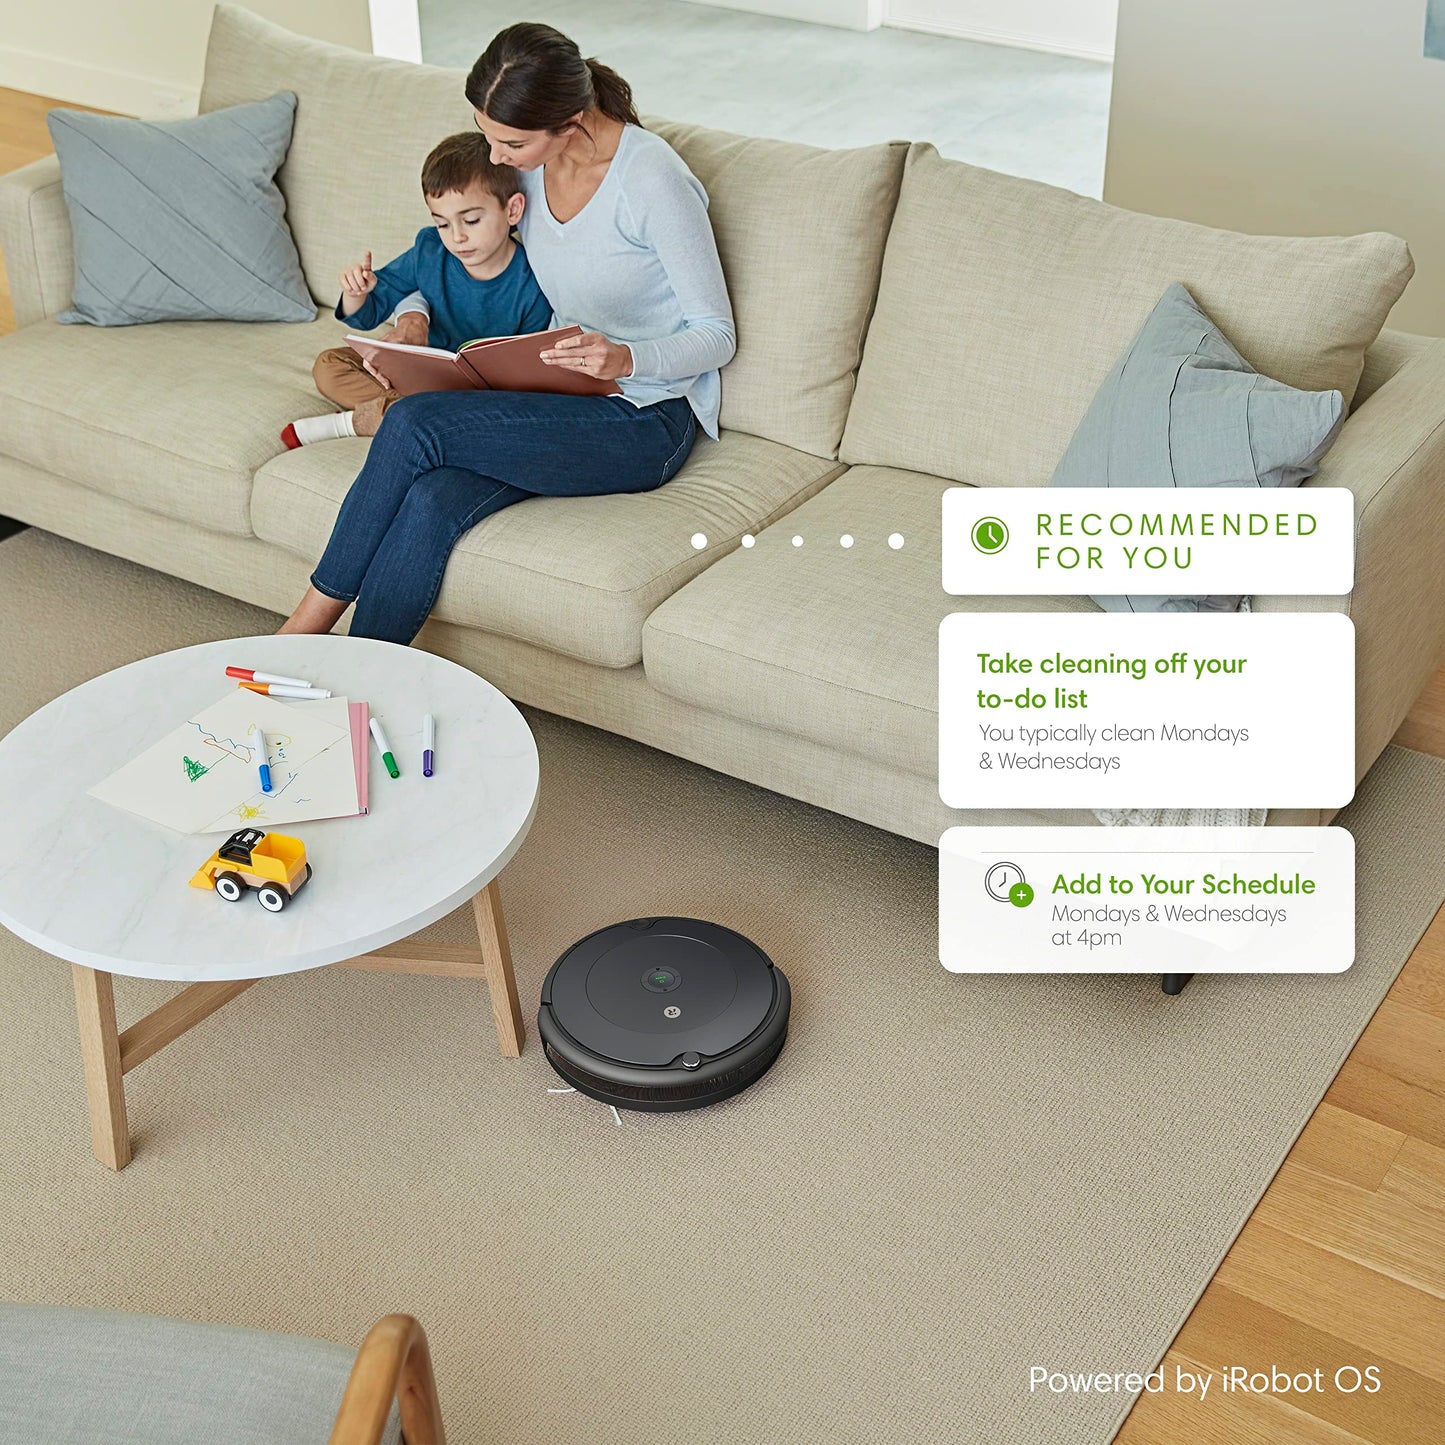 iRobot Roomba 694 Robot Vacuum-Wi-Fi Connectivity, Personalized Cleaning Recommendations, Works with Alexa, Good for Pet Hair, Carpets, Hard Floors, Self-Charging, Roomba 694 - Like New